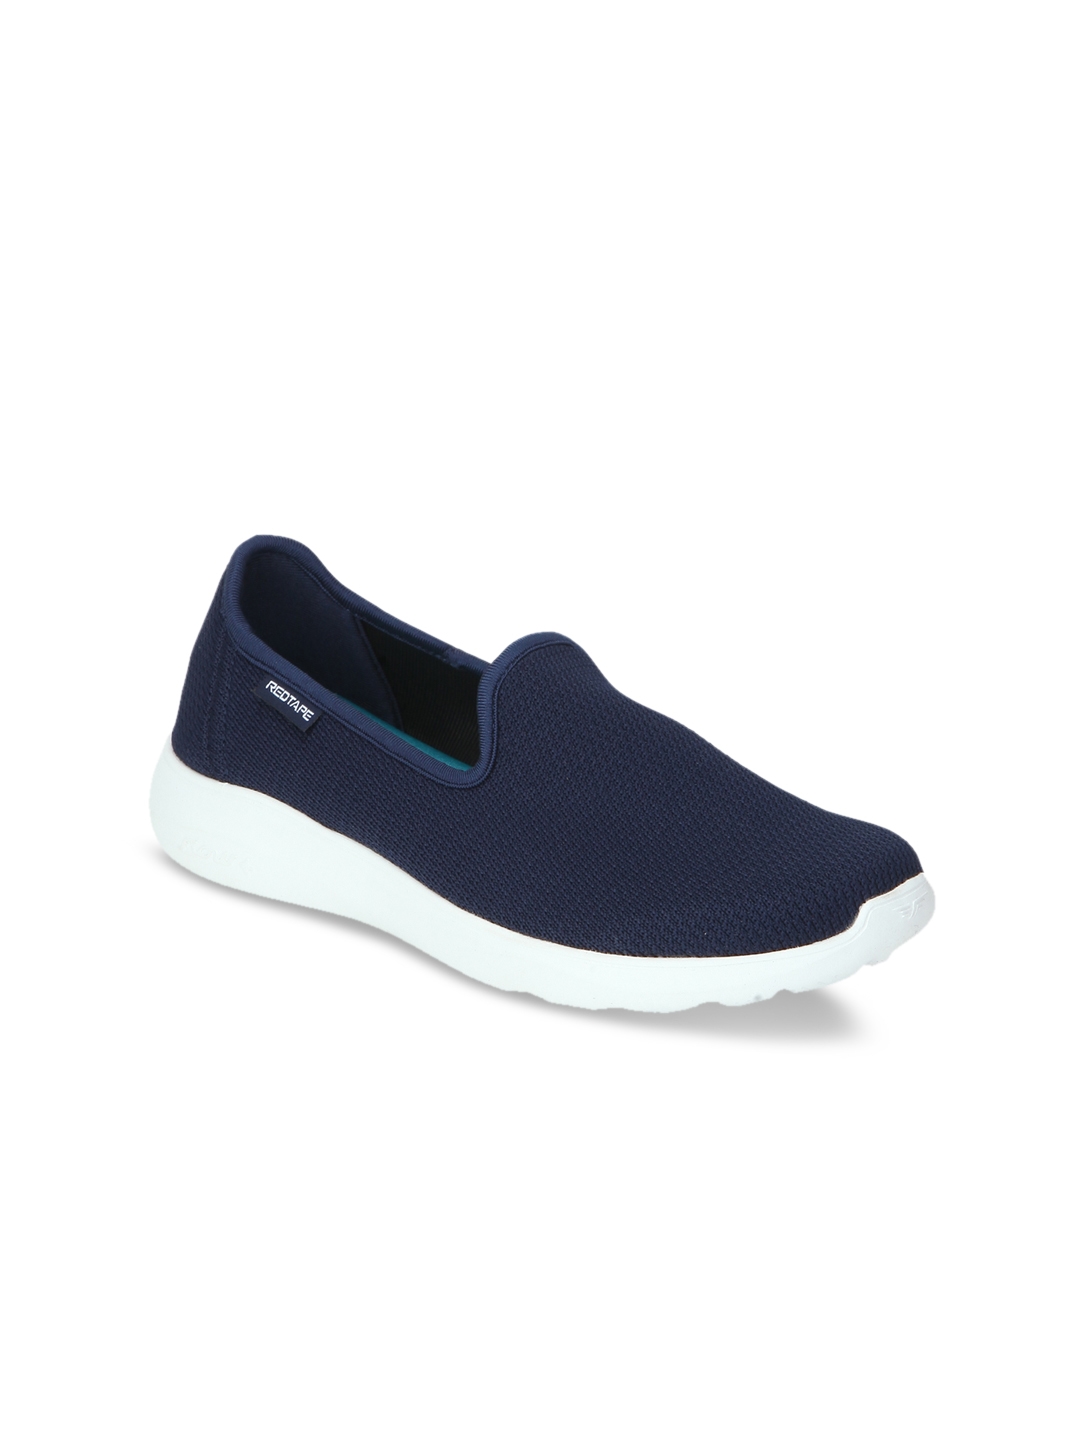 red tape navy blue sneakers